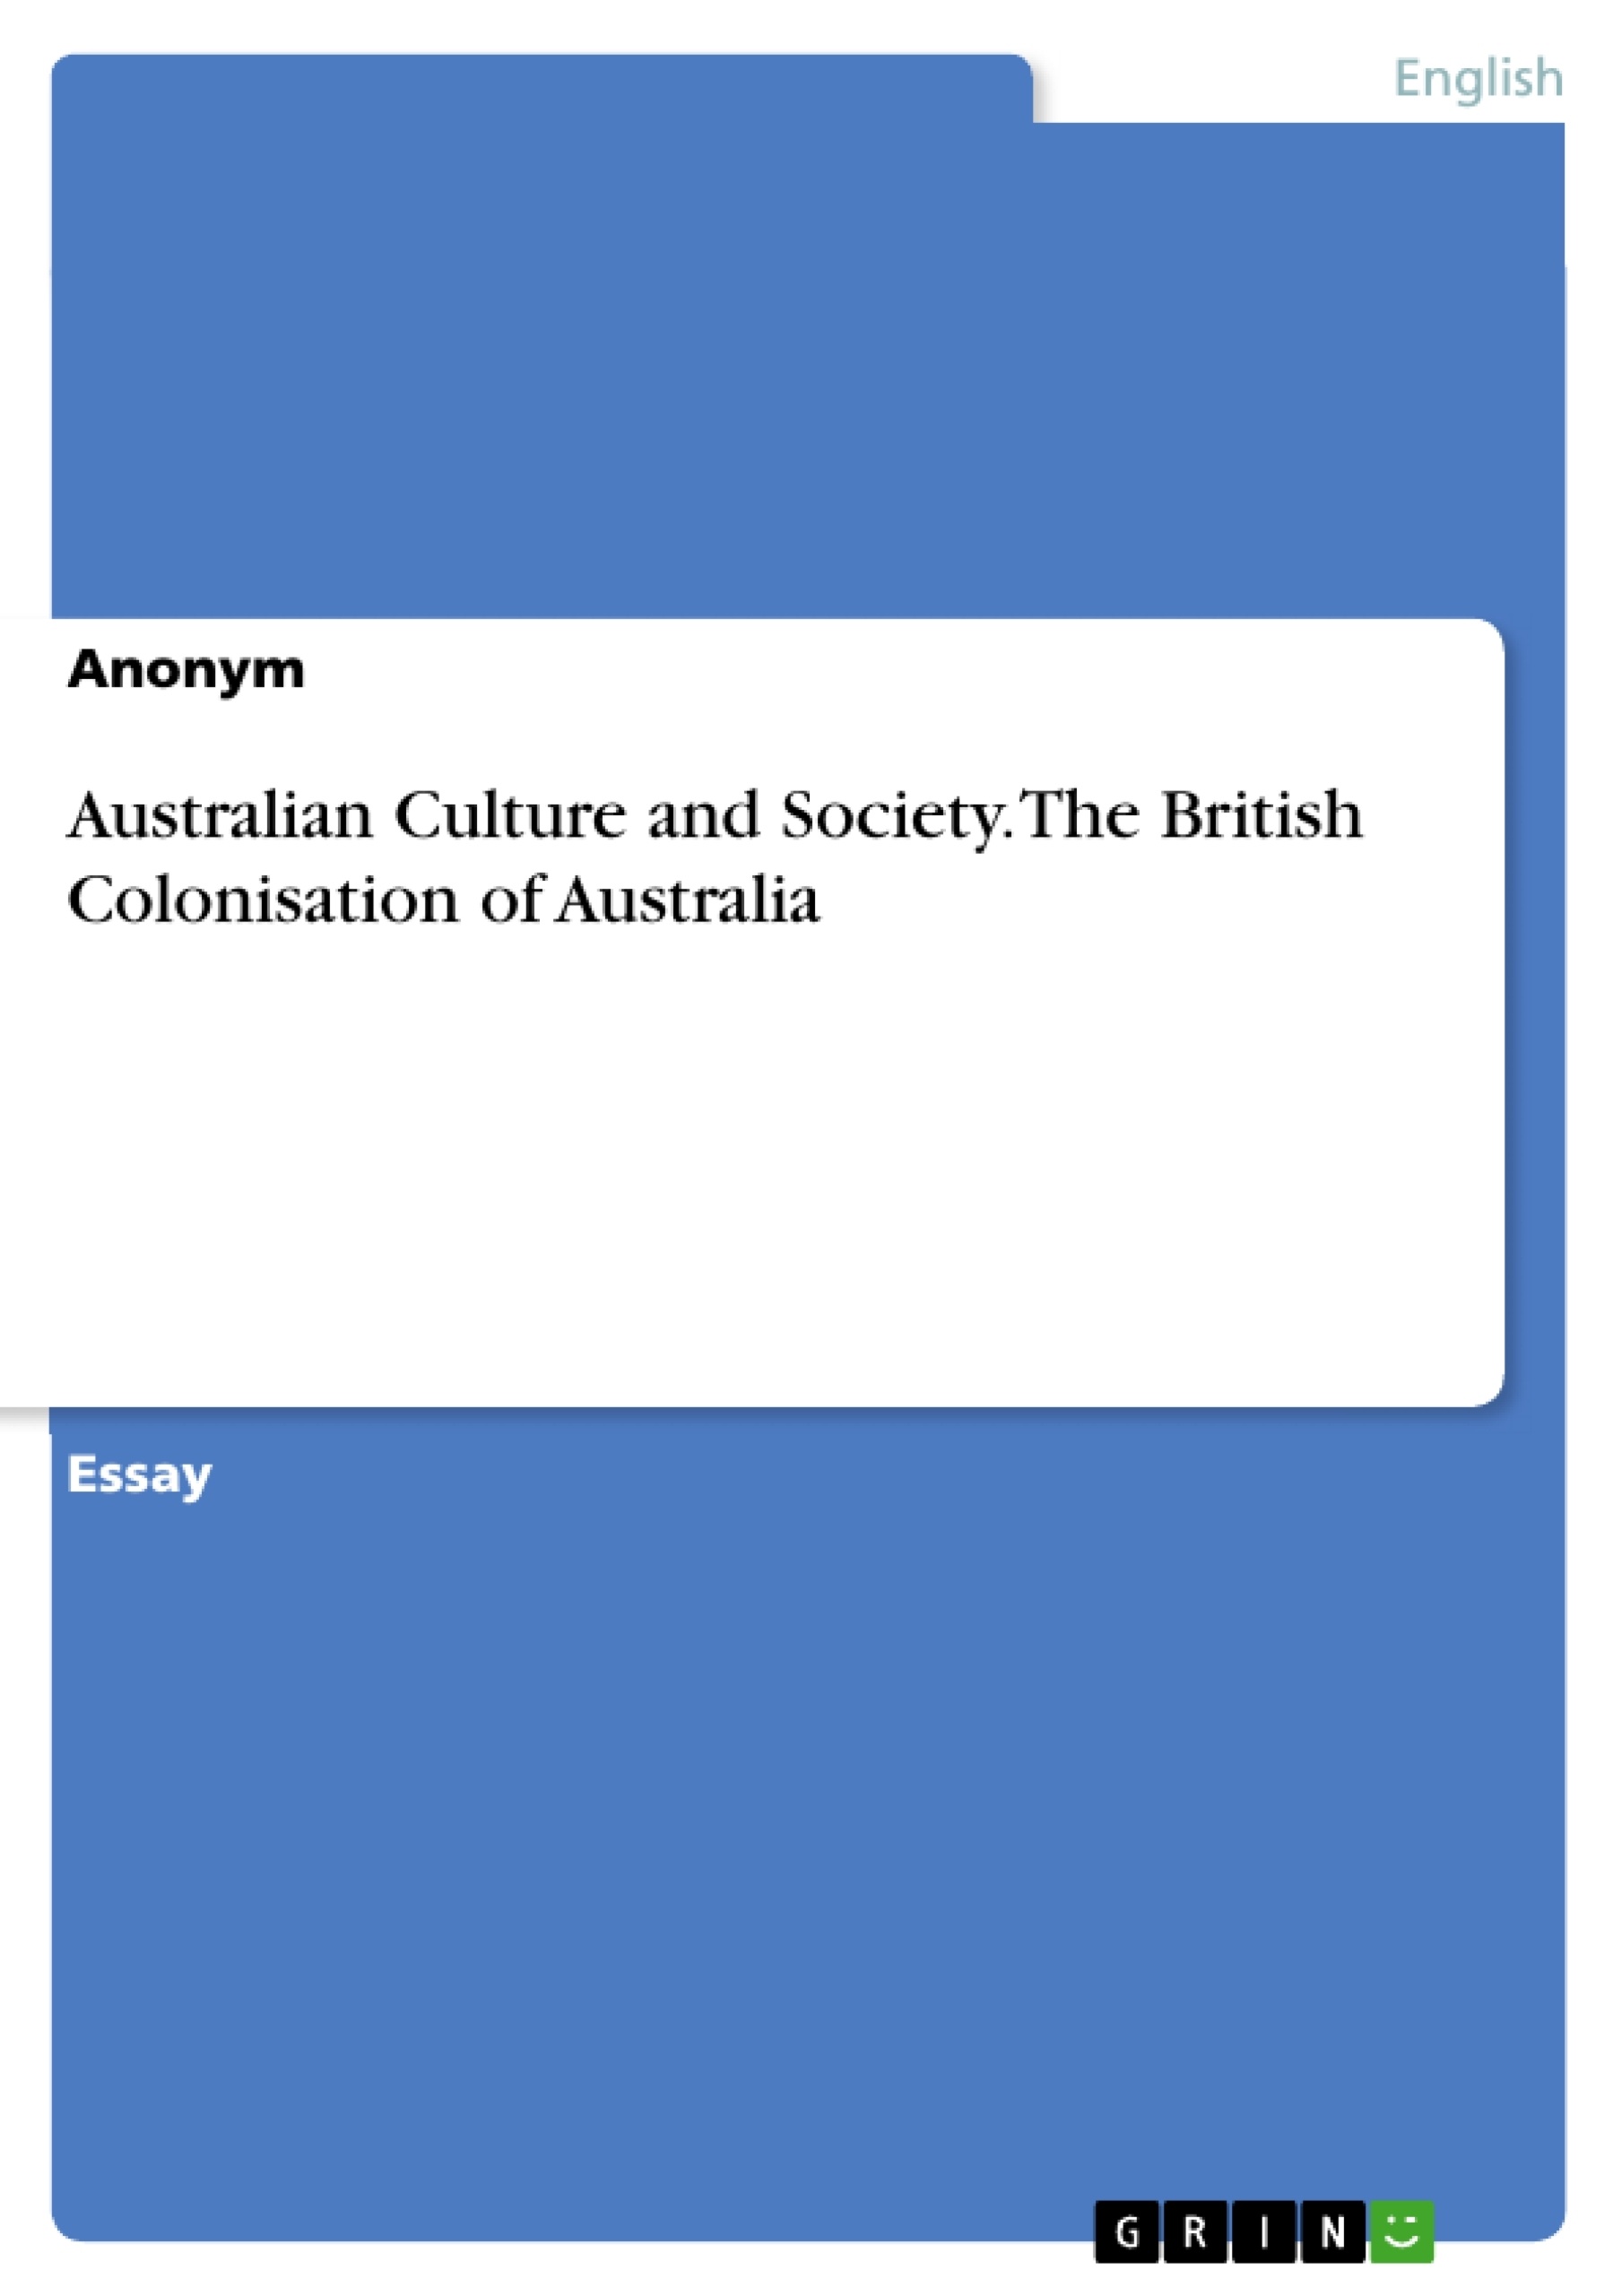 Título: Australian Culture and Society. The British Colonisation of Australia